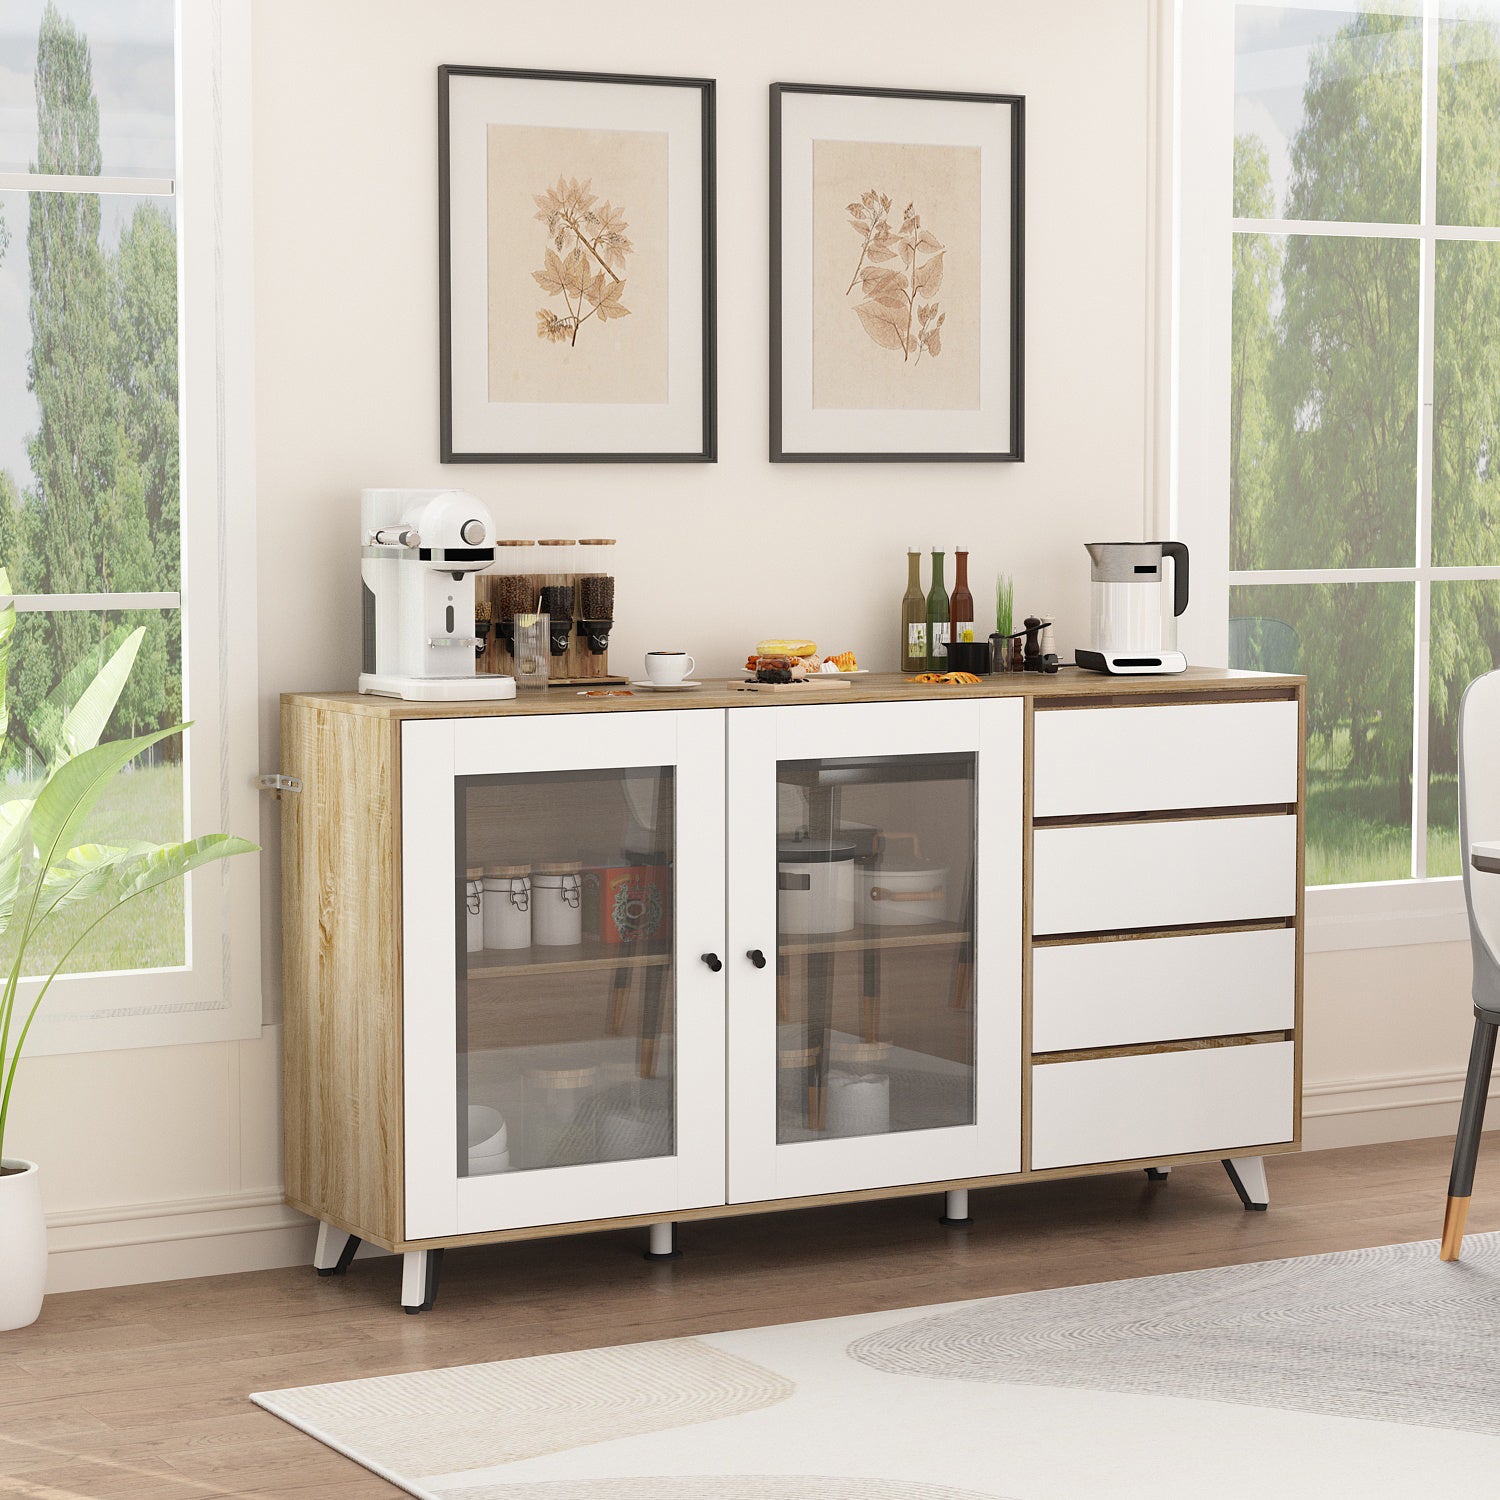 Kitchen Buffet Server Sideboard Wide Sideboard with Storage Compartments Tempered Glass